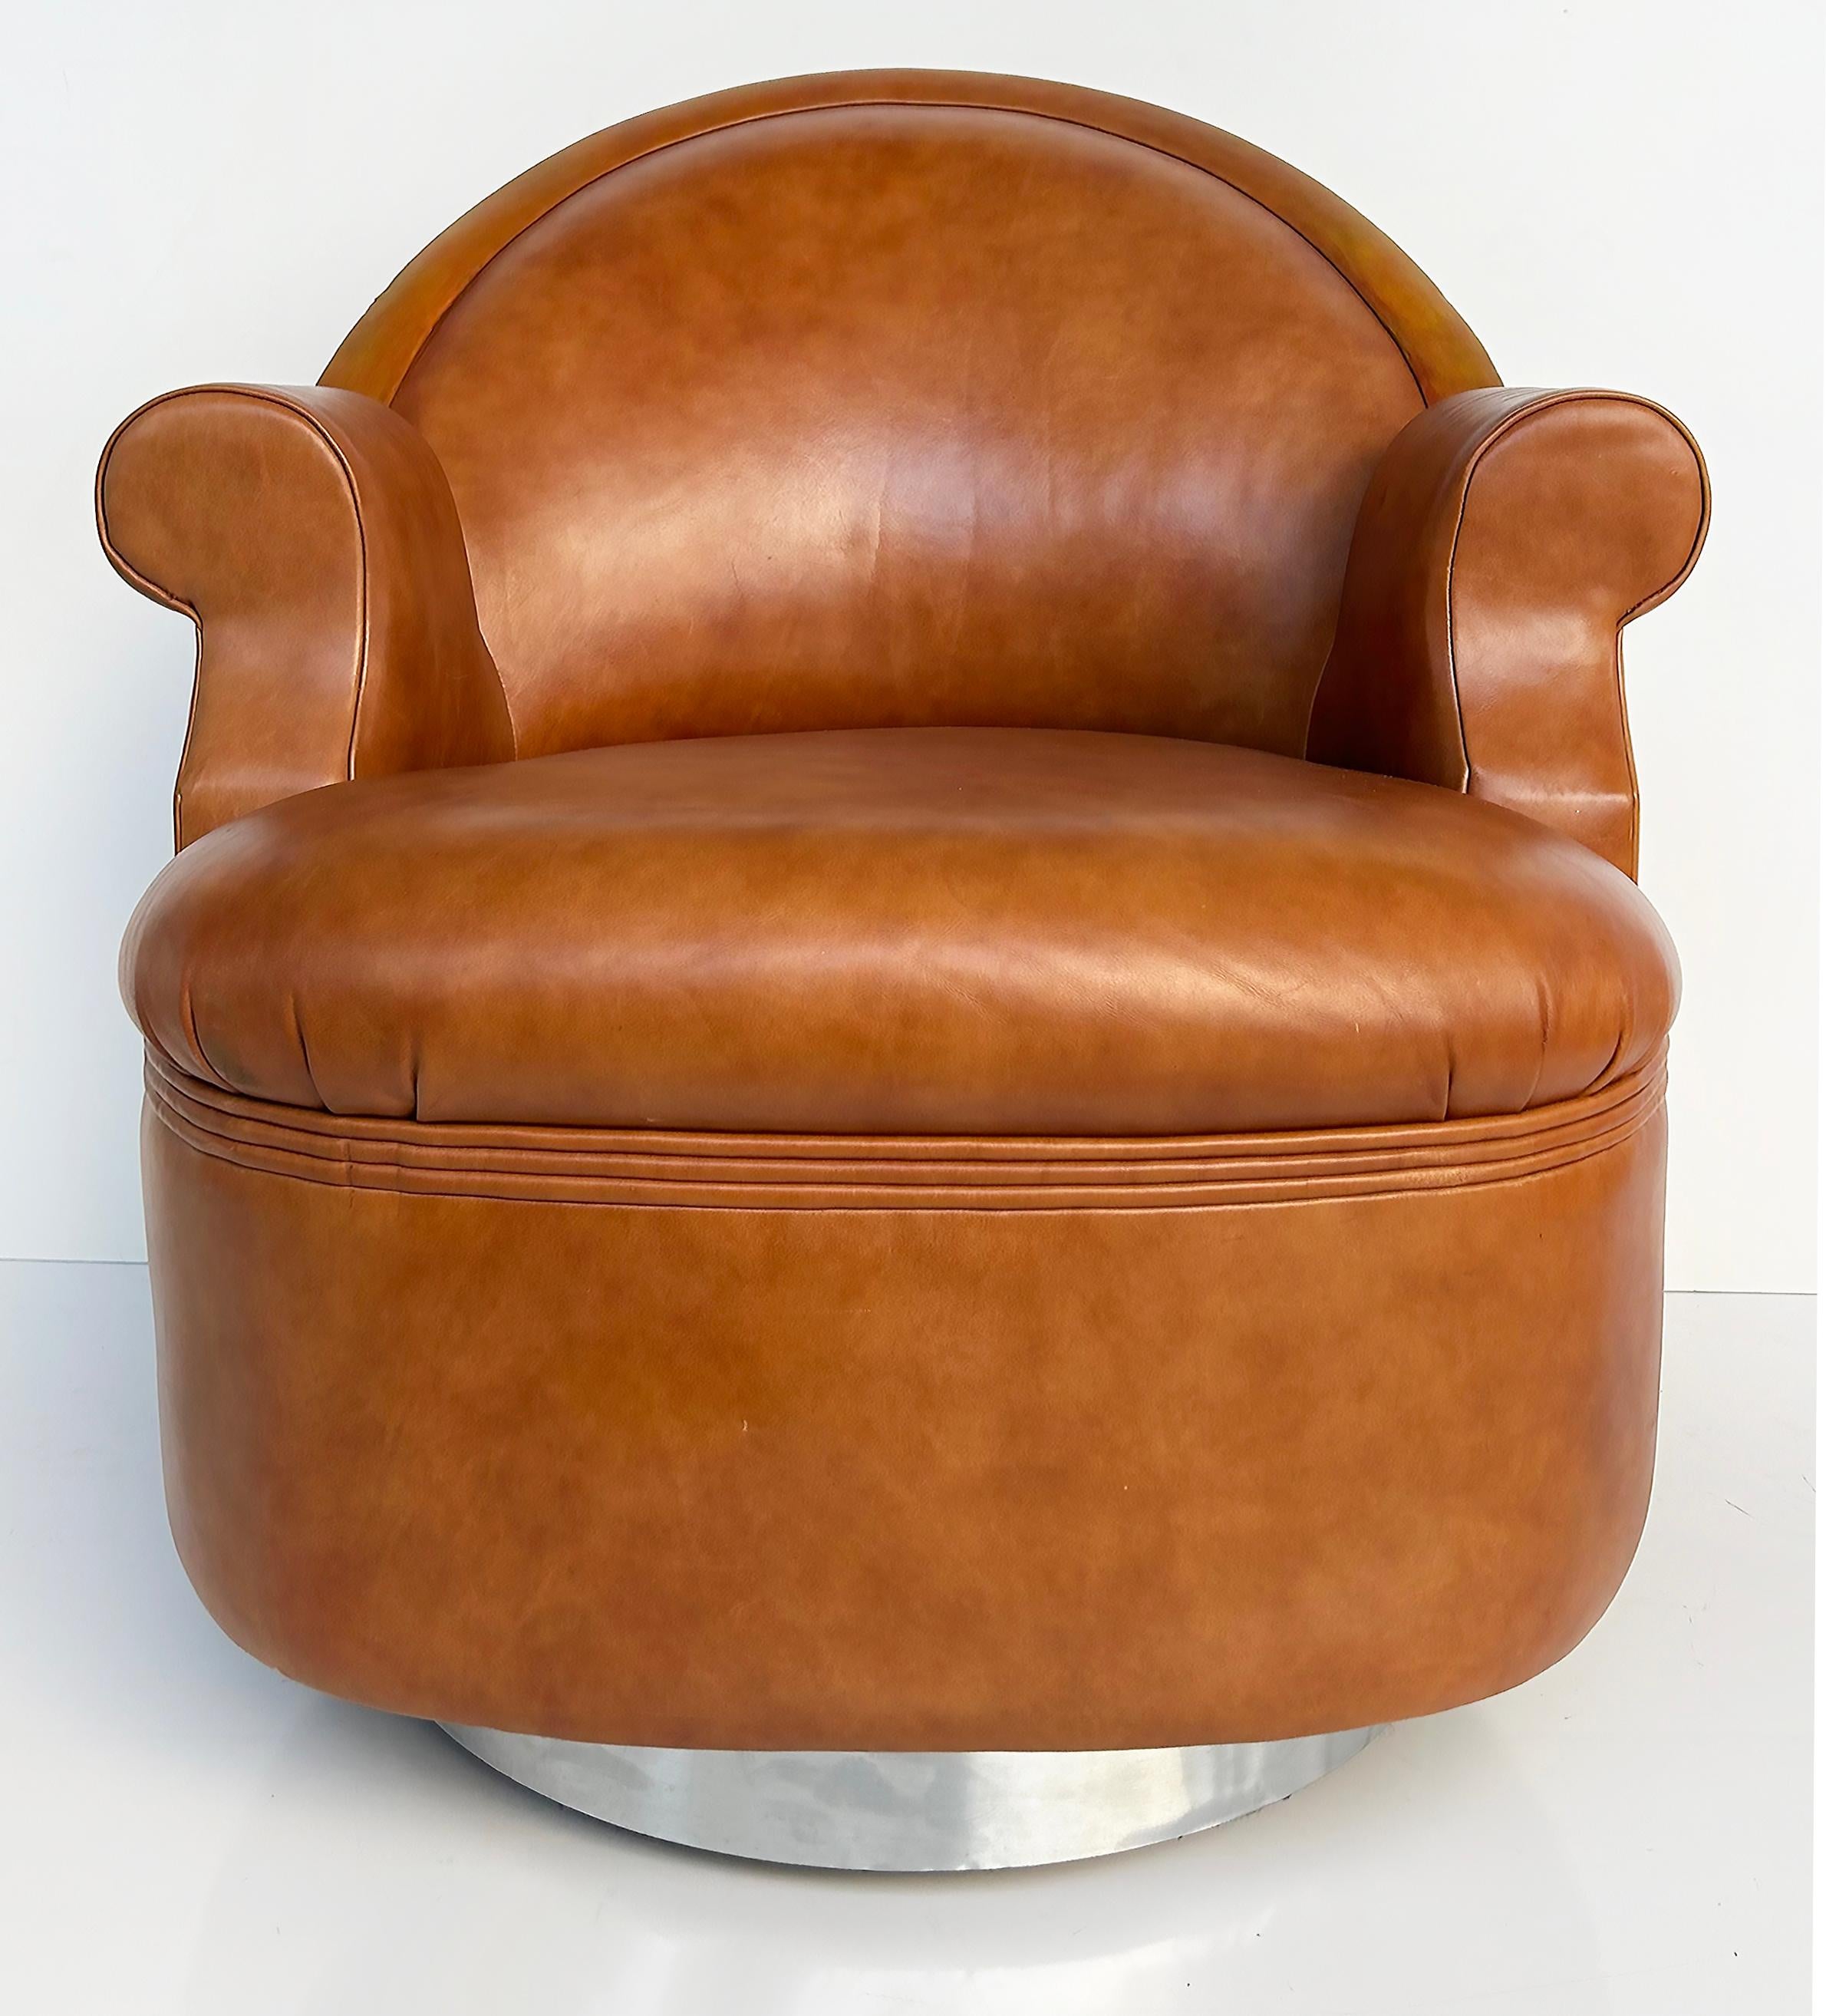 Modern  Steve Chase Martin Brattrud Chrome Leather Swivel Chairs on Casters- A Pair For Sale